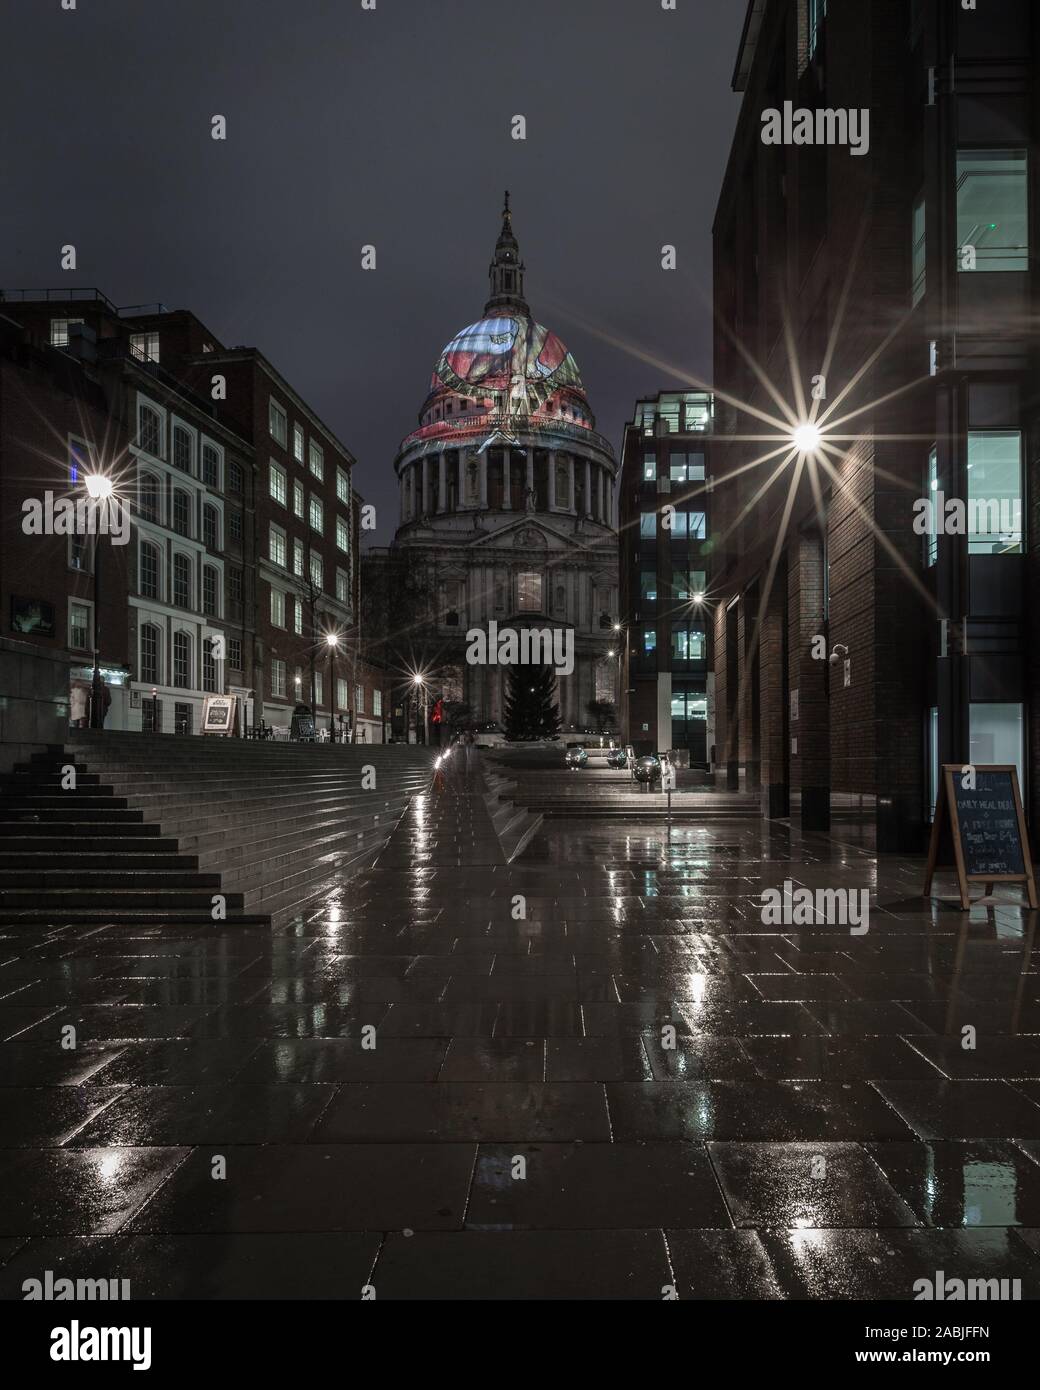 Walkway to a  view of 'Ancient of Days' by William Blake projected on to dome of St Paul's Cathedral in background Stock Photo